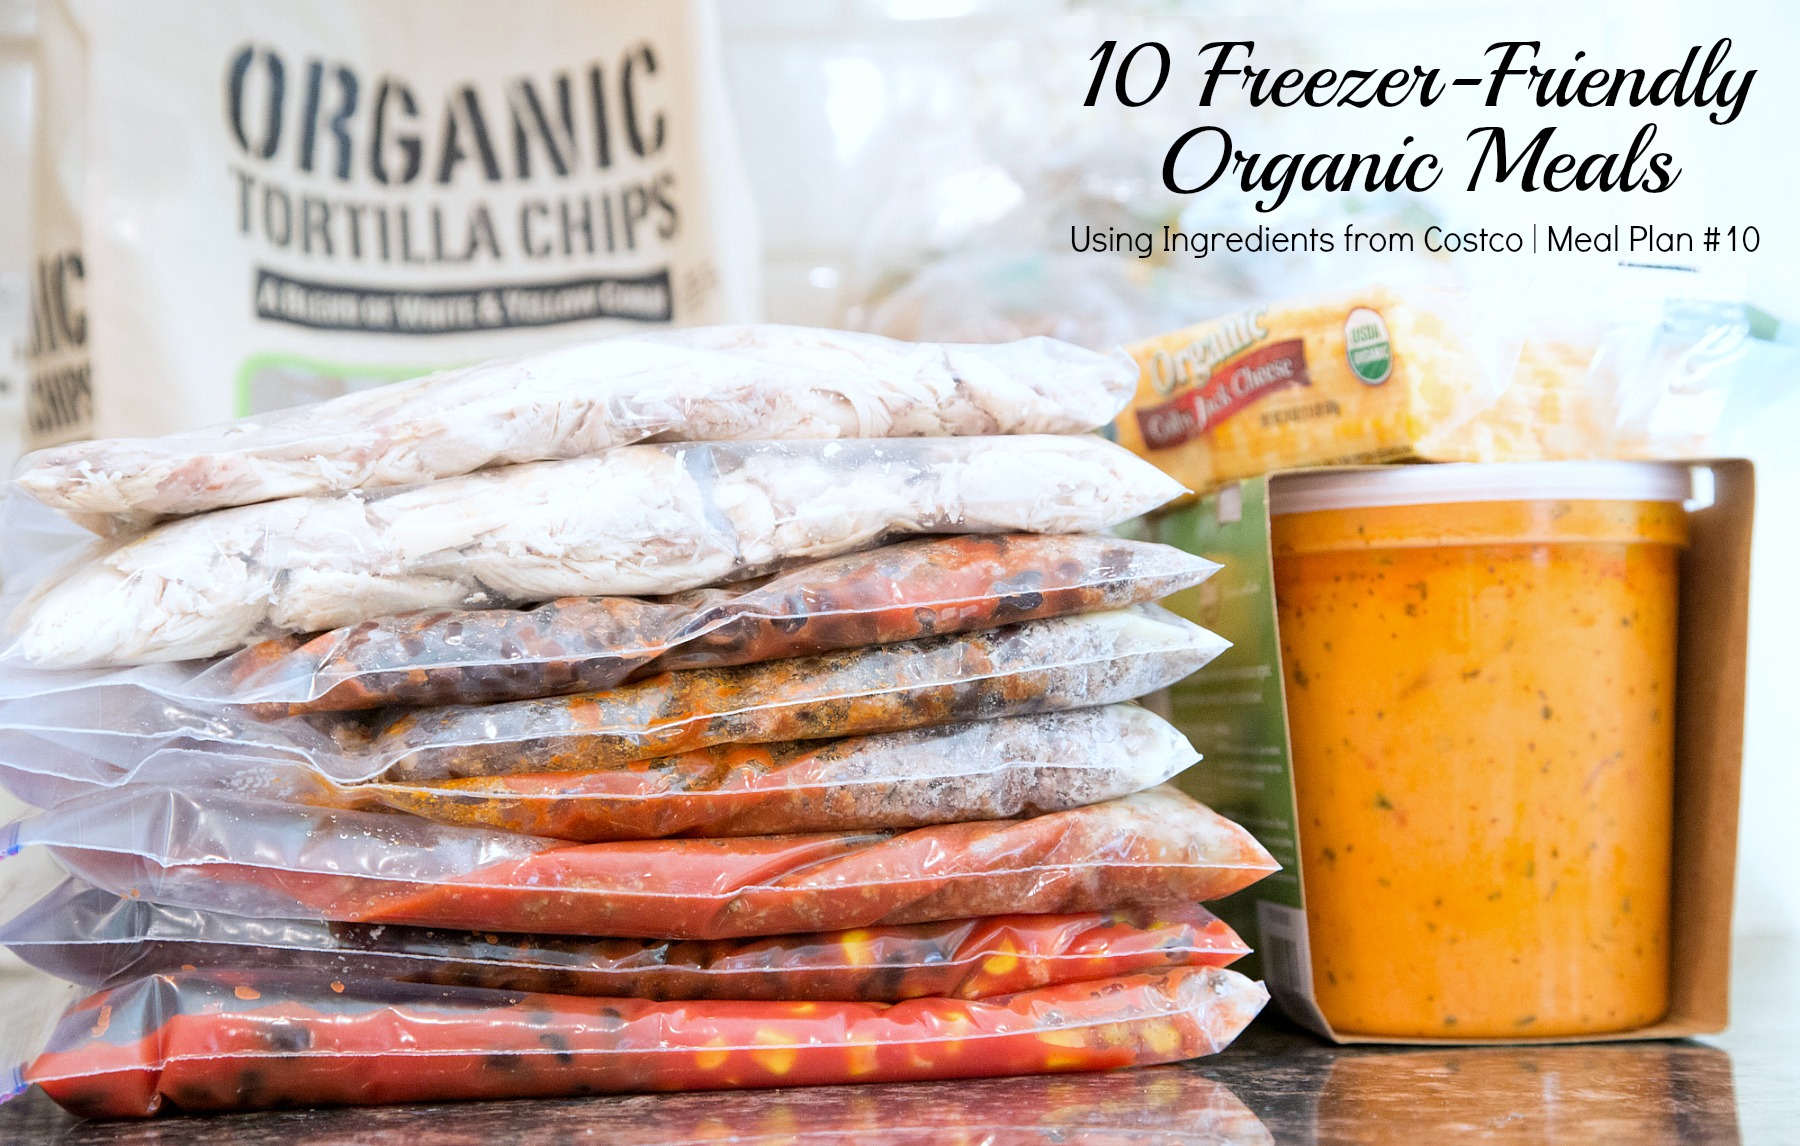 10 Freezer Friendly Organic Meals Using Ingredients from Costco